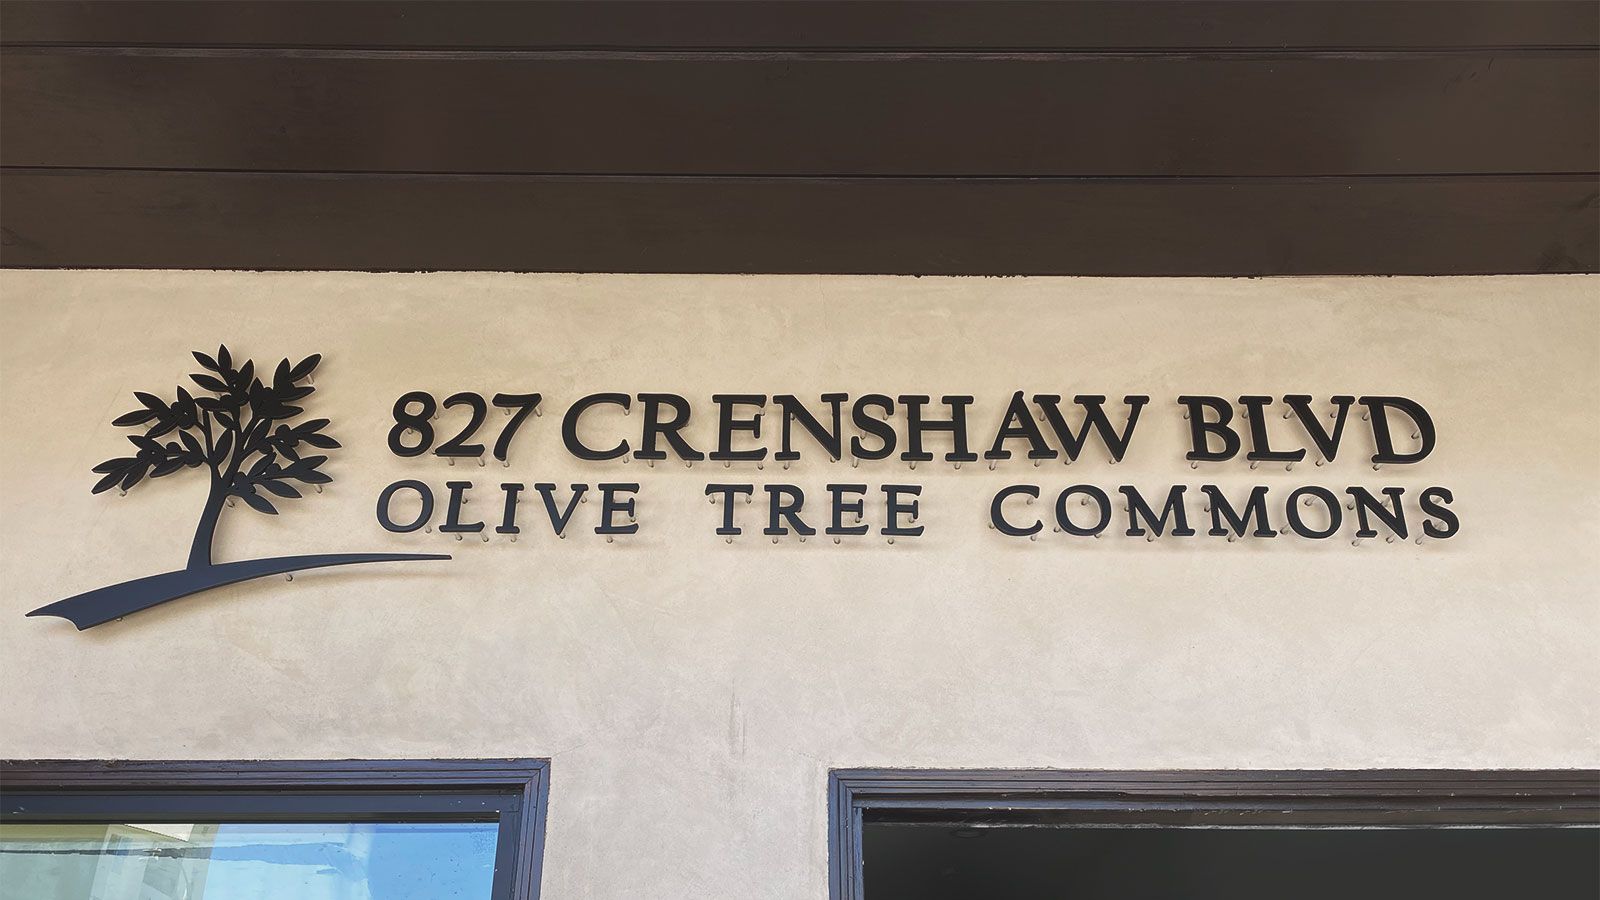 Olive tree commons 3d sign